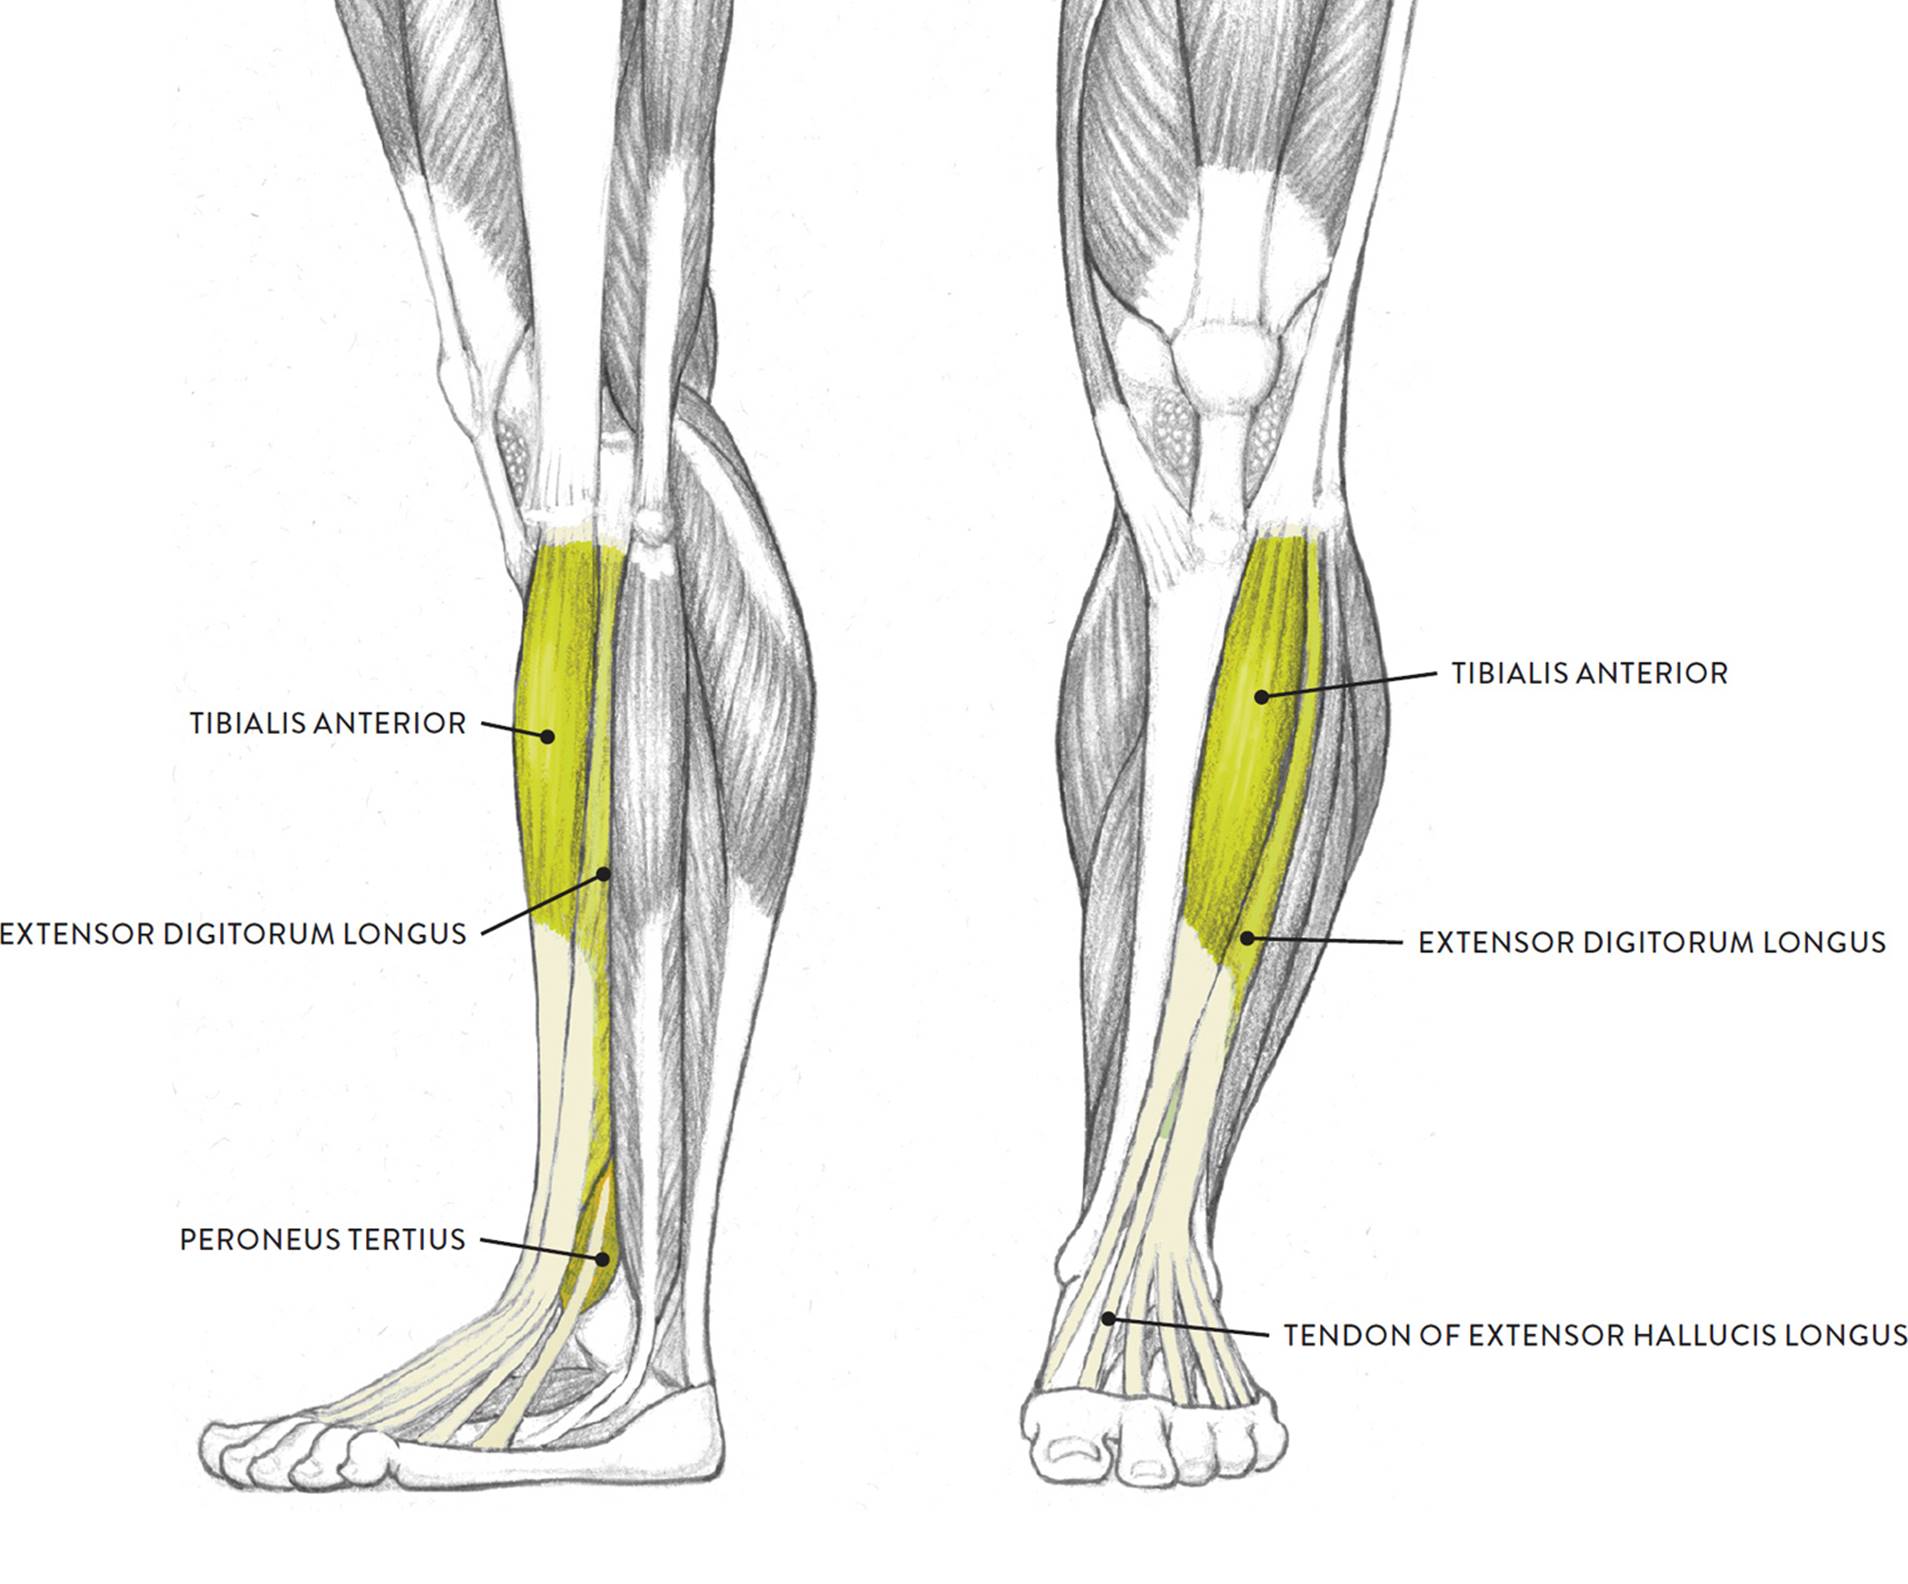 Leg Muscles Diagram Labeled : Diagram illustrating muscle groups on ...